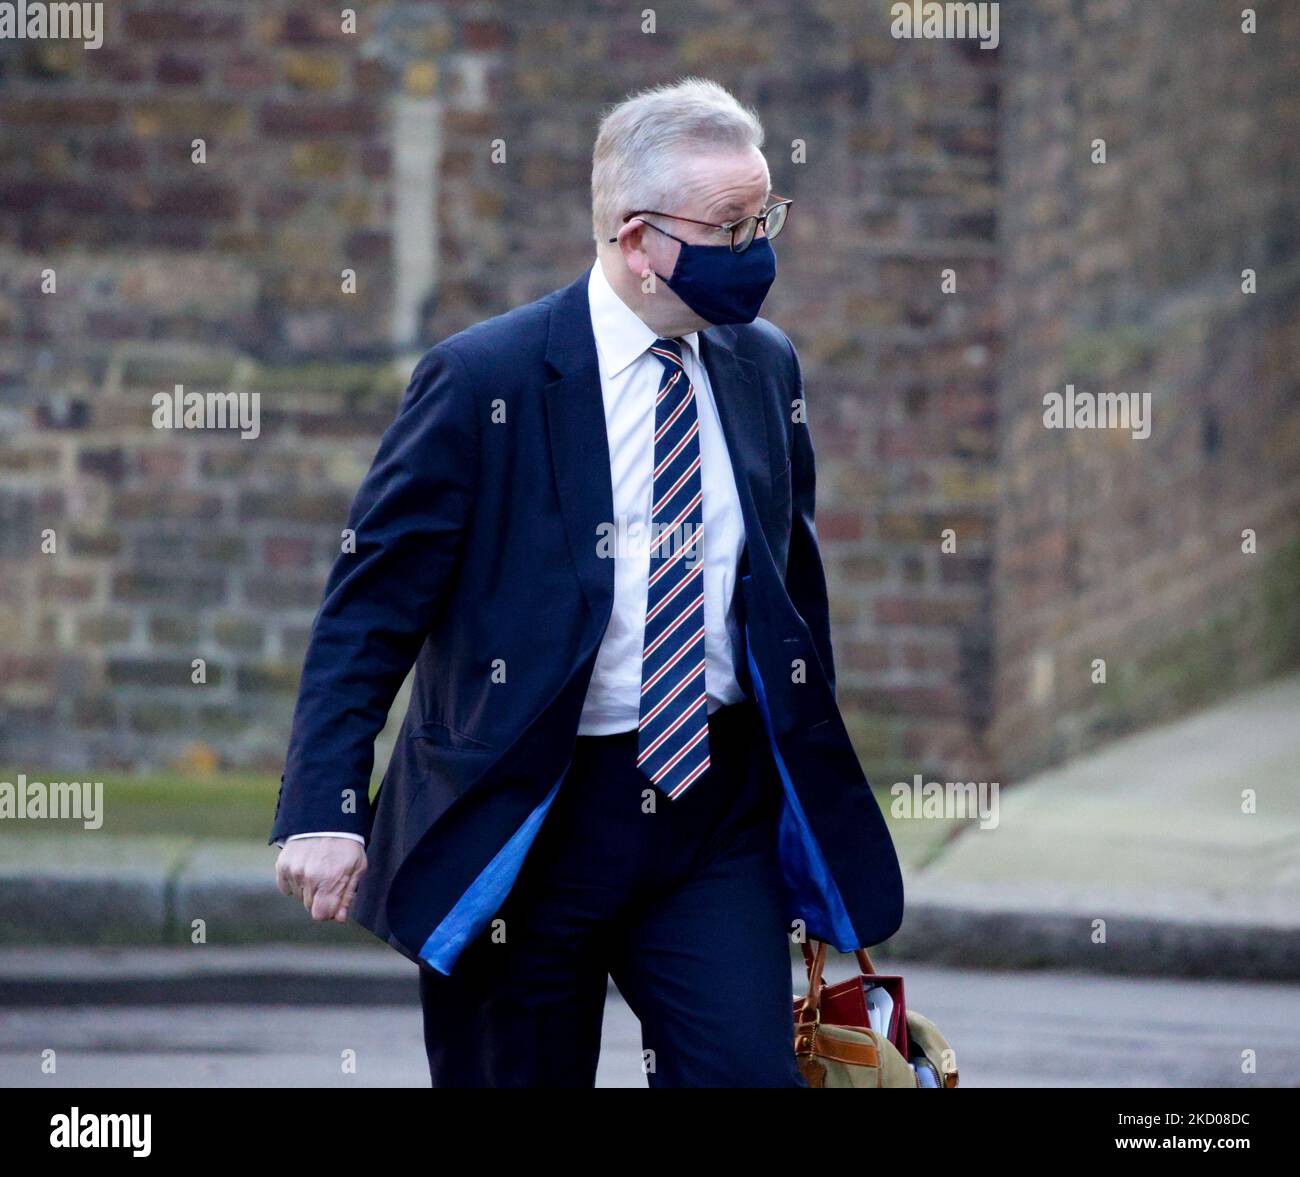 British Secretary of State for Levelling Up, Housing and Communities Michael Gove, Conservative Party MP for Surrey Heath, walks to his government car on Downing Street in London, England, on January 12, 2022. (Photo by David Cliff/NurPhoto) Stock Photo